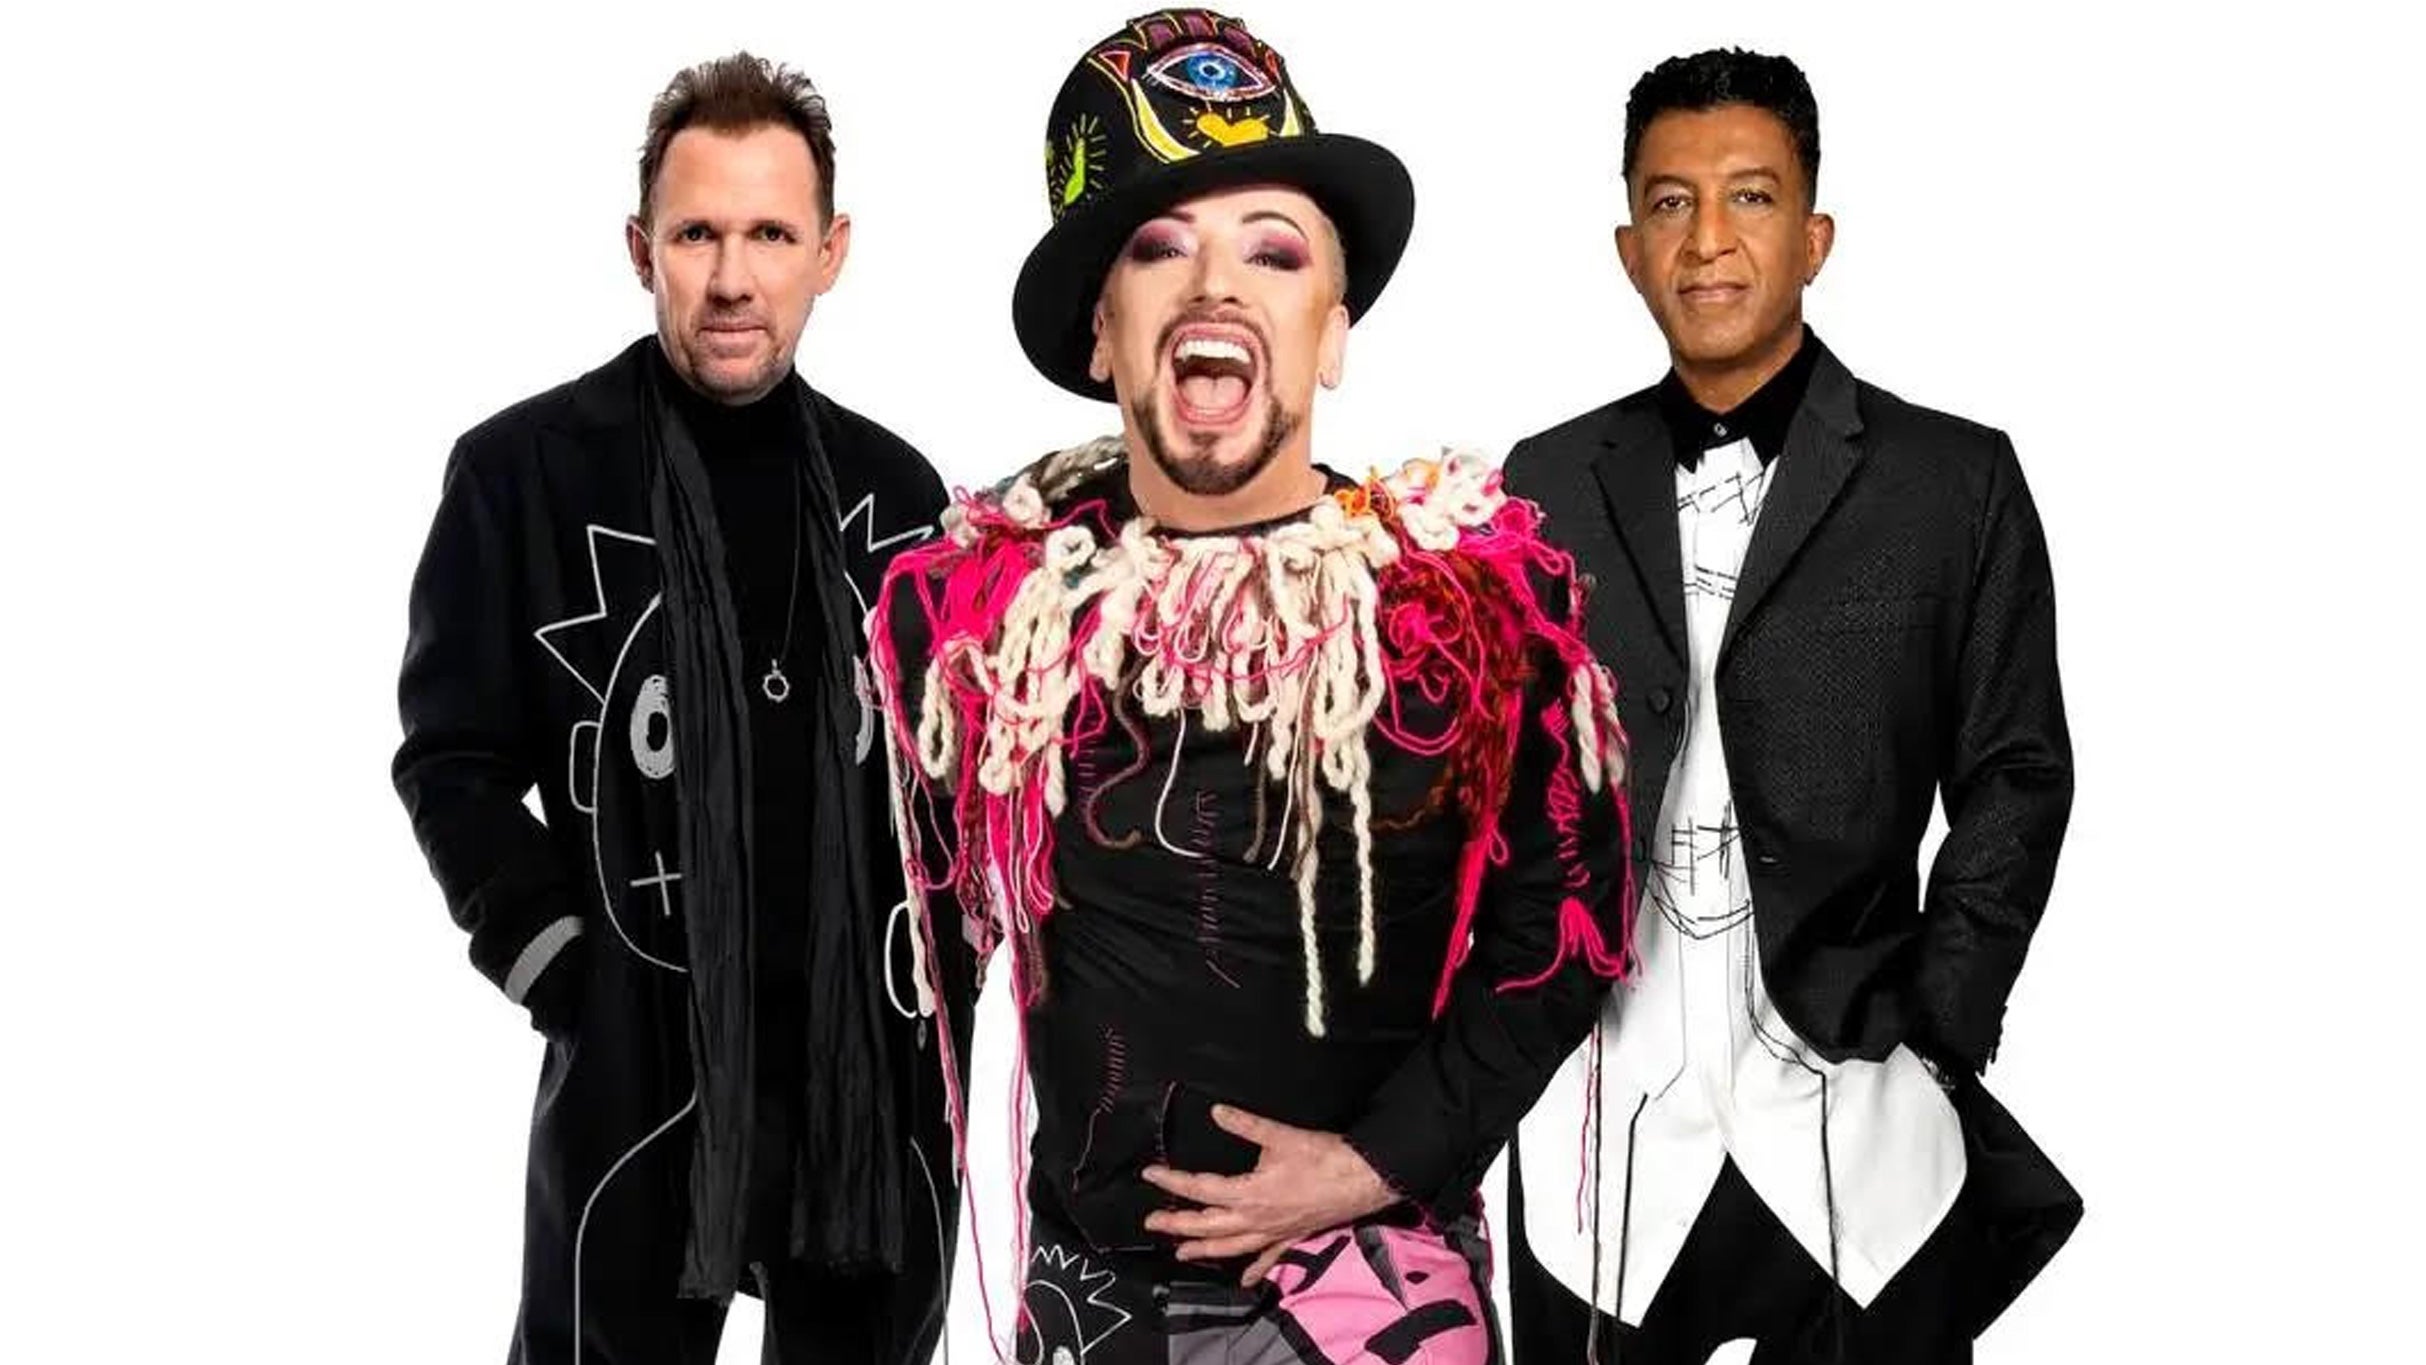 Boy George & Culture Club: The Letting It Go Show in Bristow promo photo for Official Platinum presale offer code